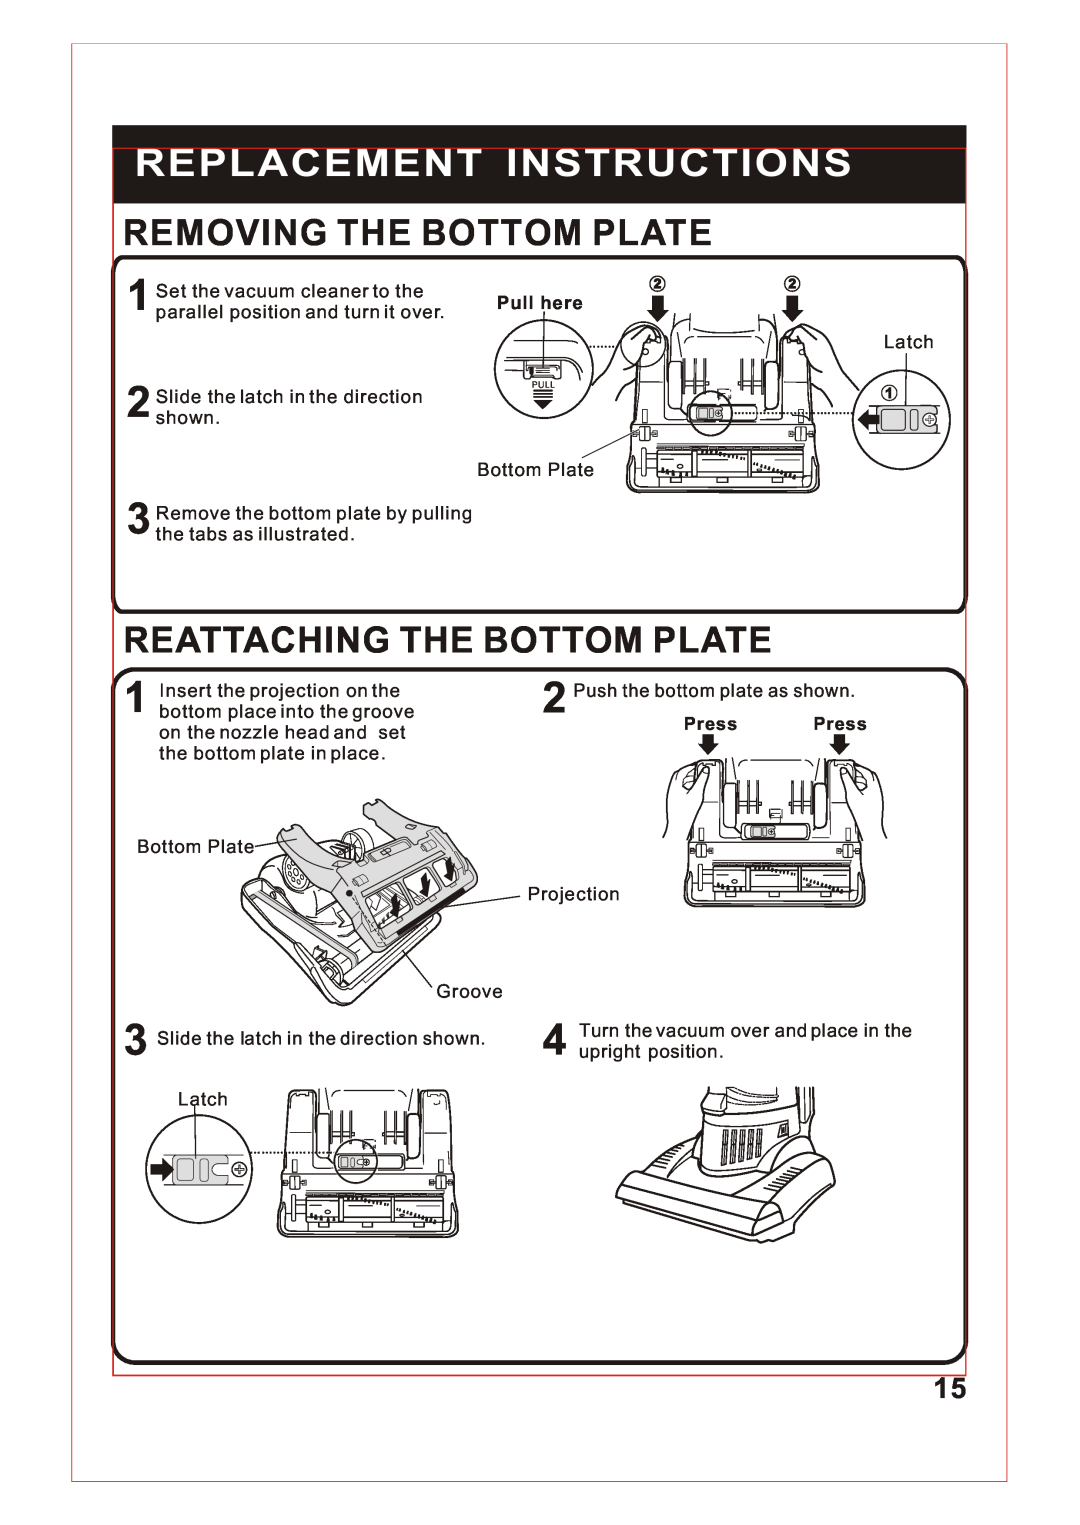 Fantom Vacuum FM740 Replacement Instructions, Removing The Bottom Plate, Reattaching The Bottom Plate, Pull here 